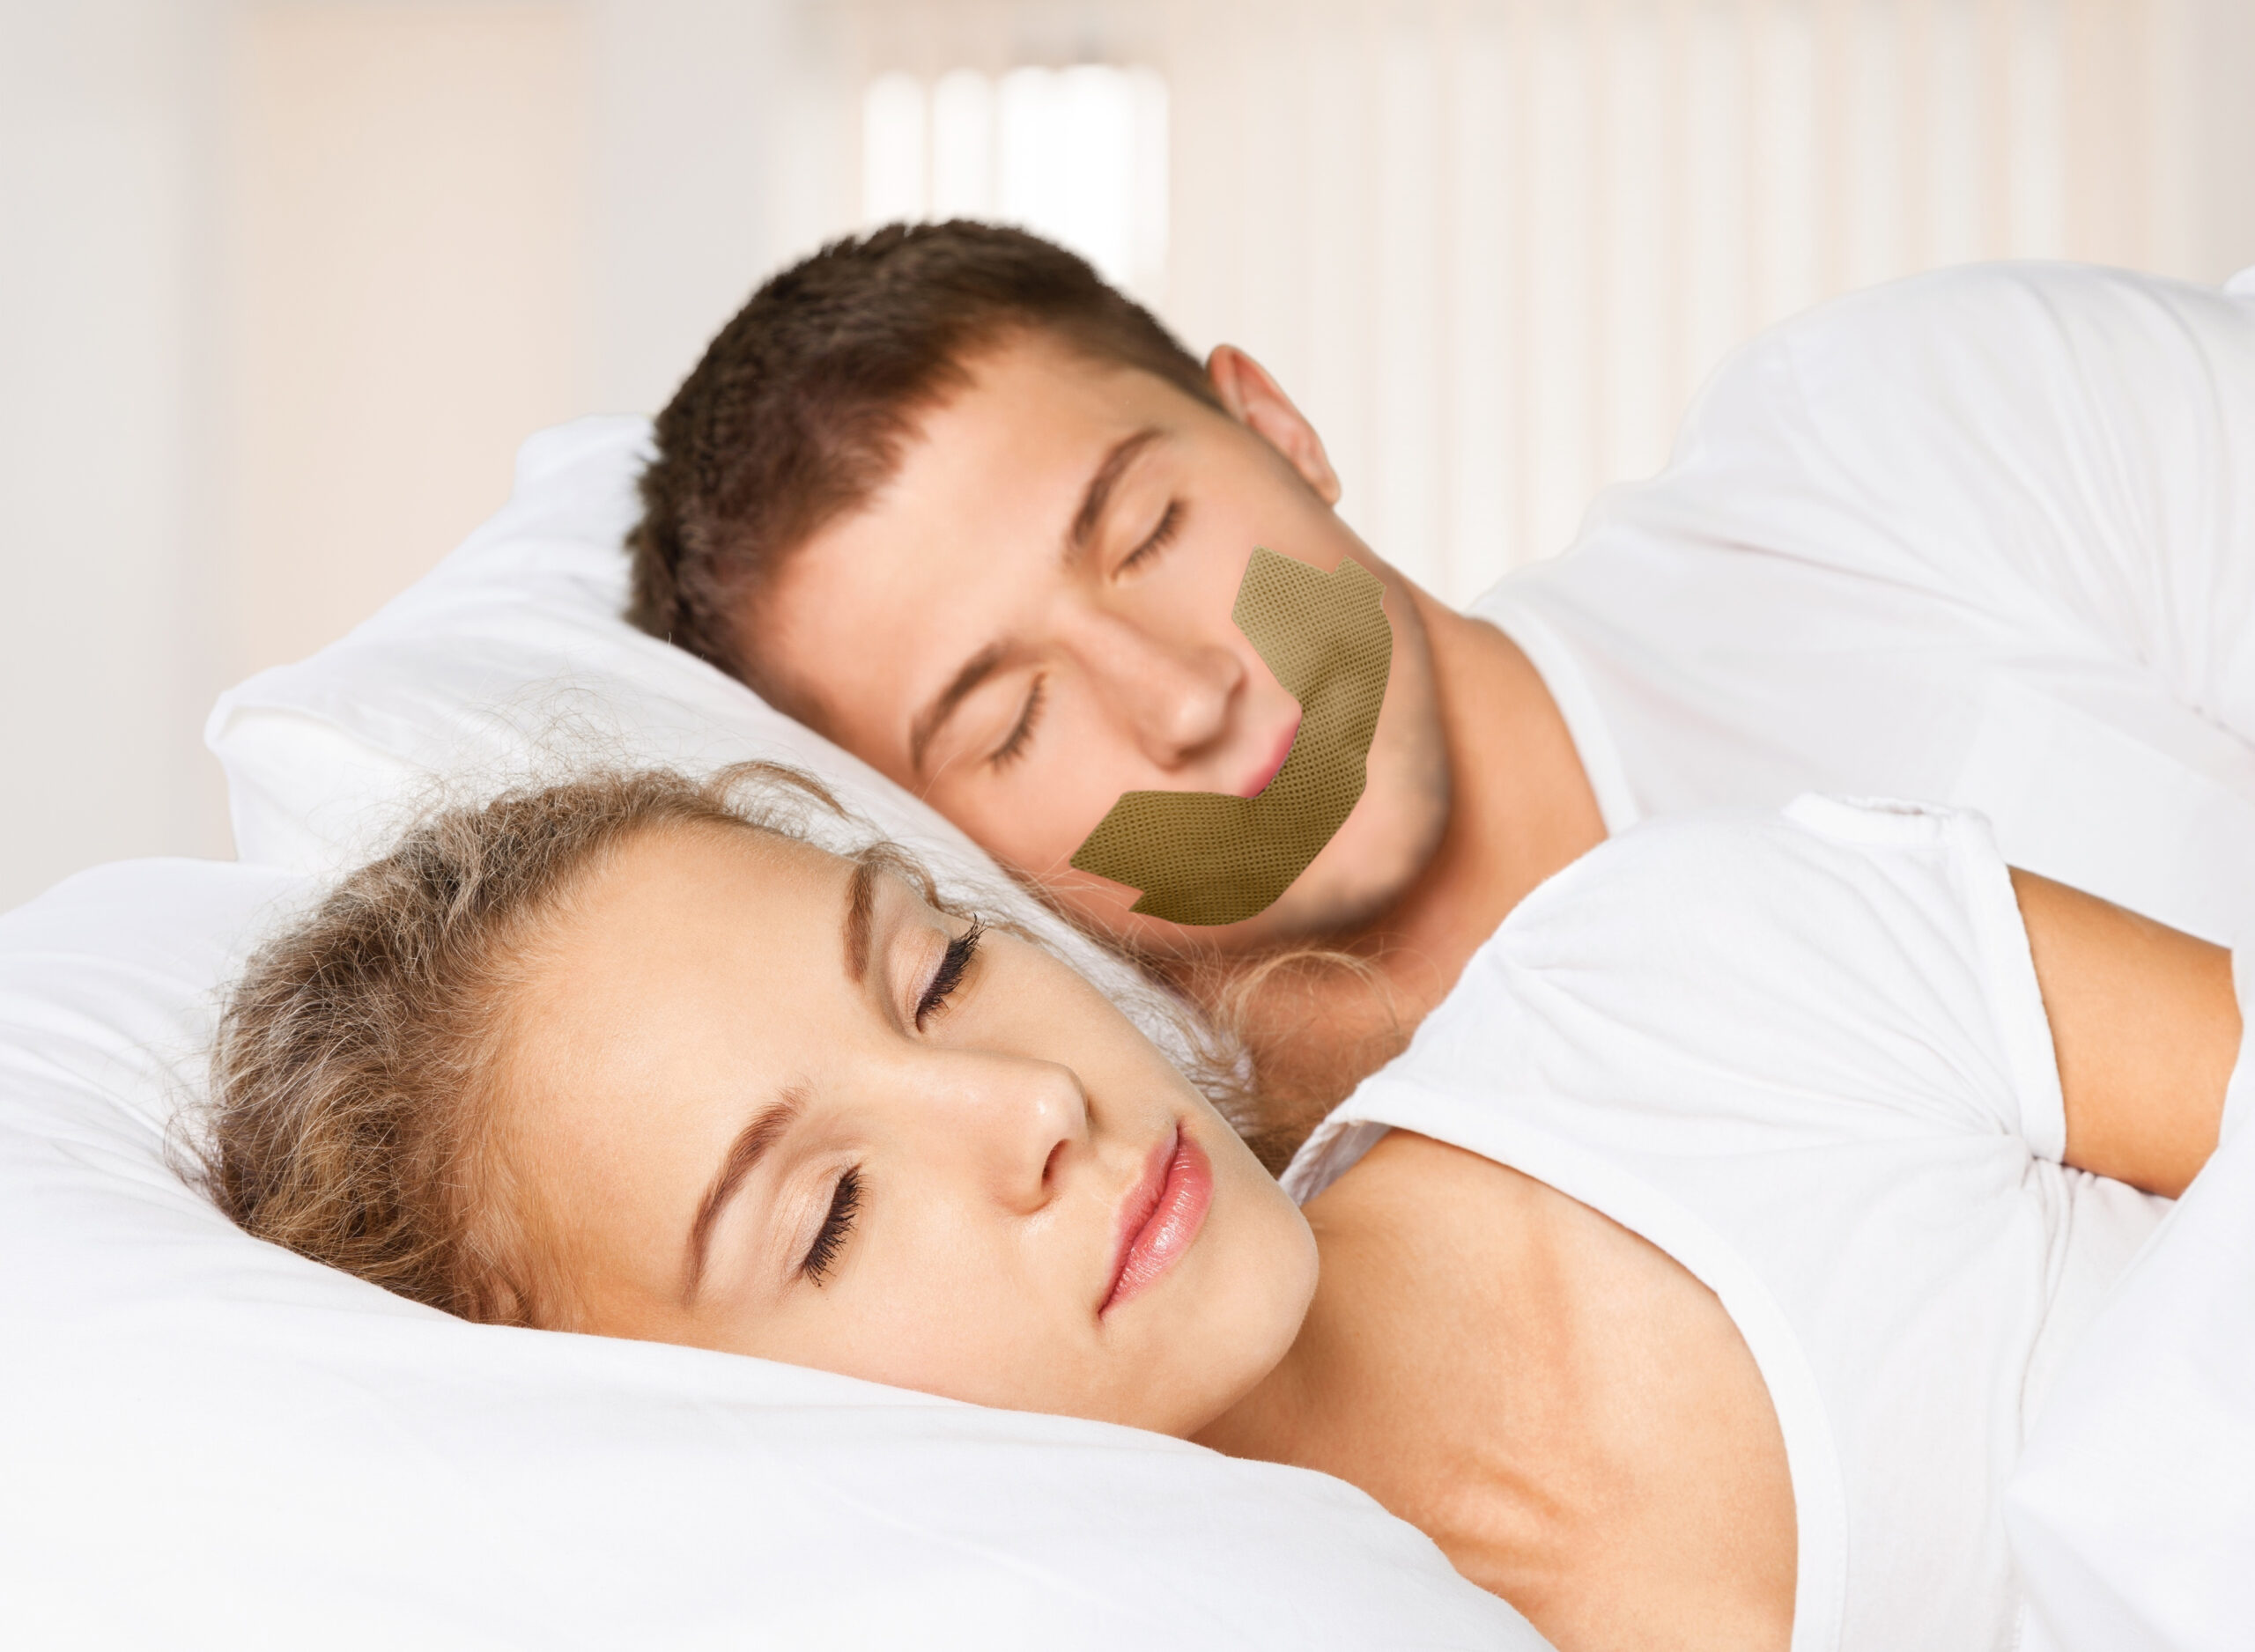 How mouth tape can prevent CPAP leaks: